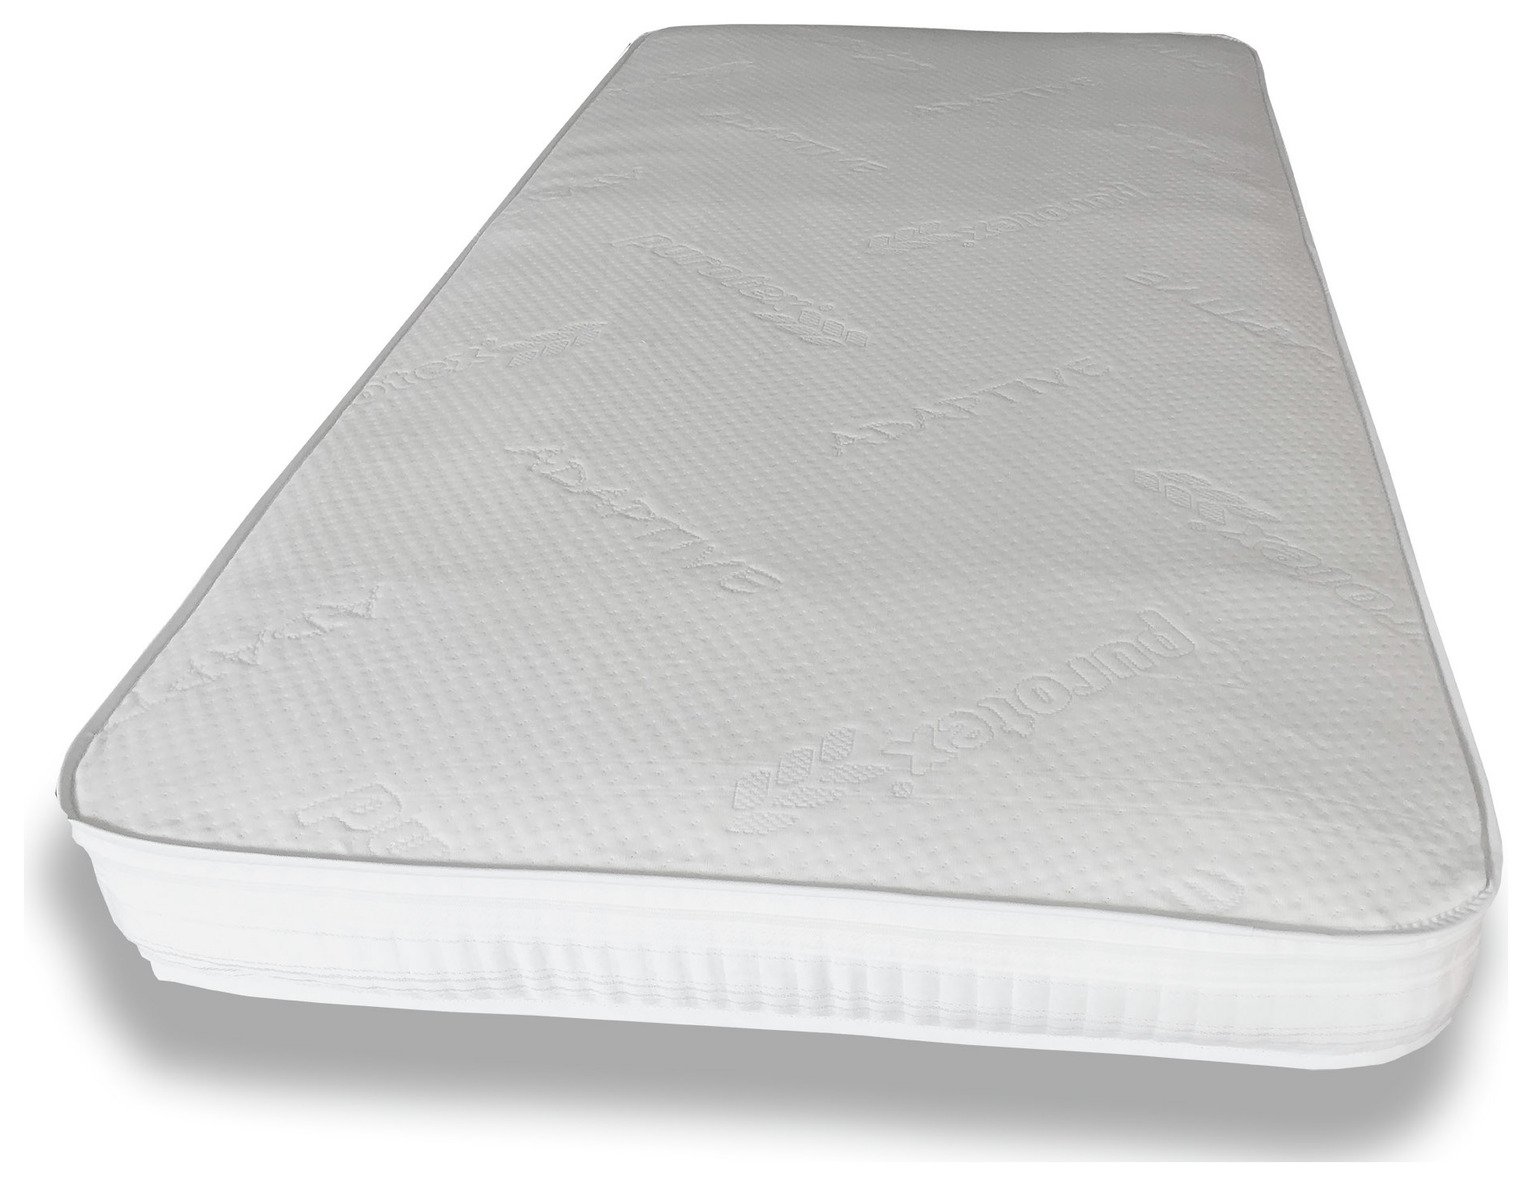 Cuggl Thermo Pocket Spring Cot Bed Mattress - 140 x 70cm